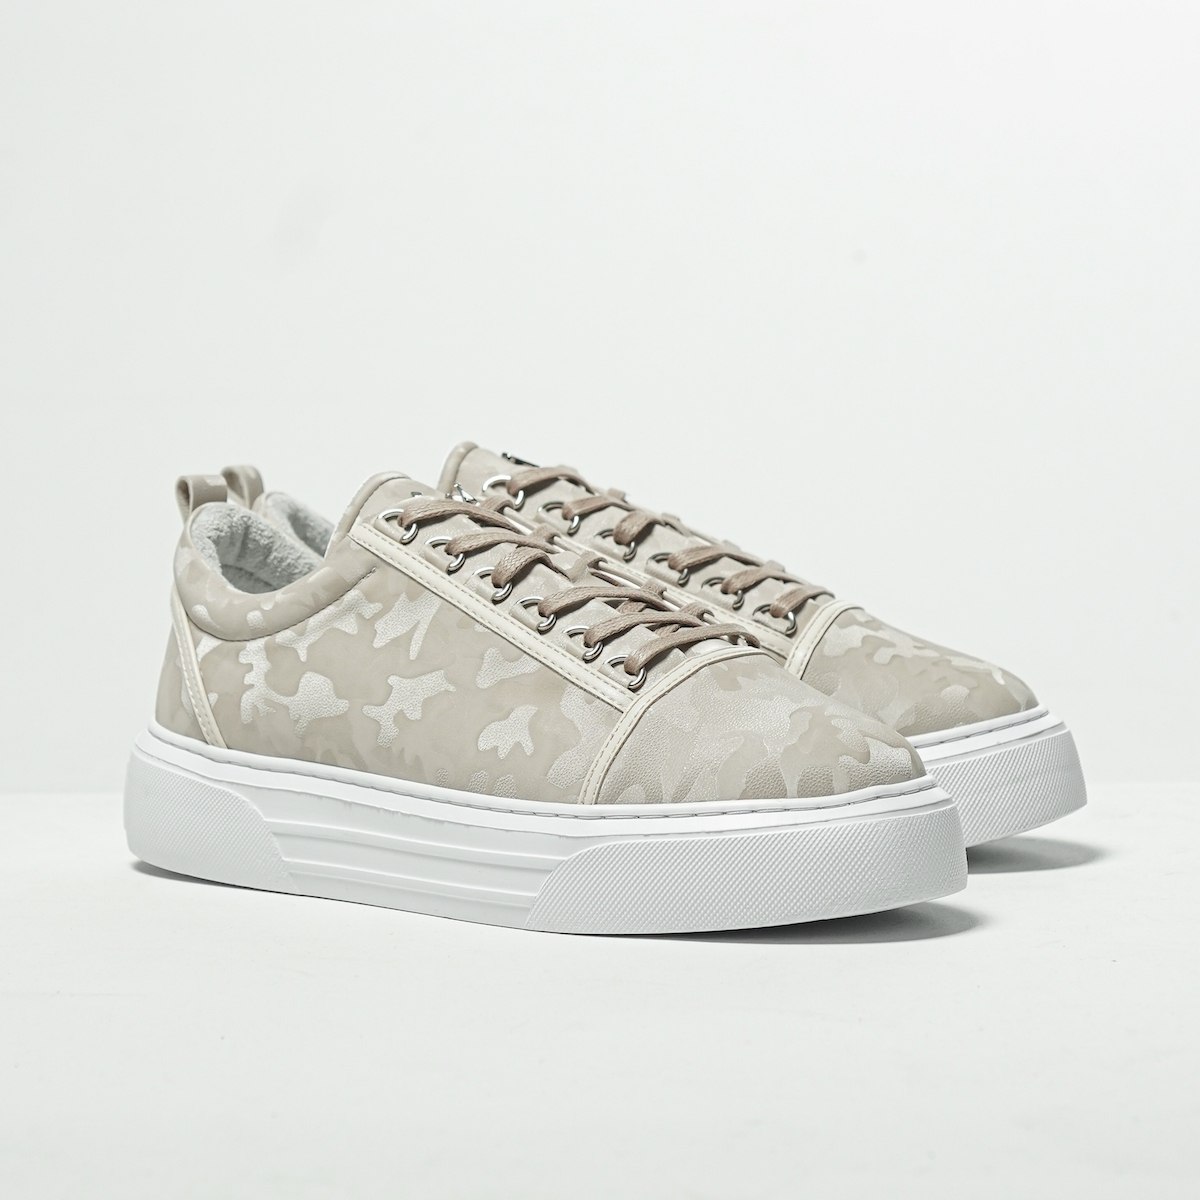 Men's Low Top Sneakers Crowned Shoes Camo Creme | Martin Valen